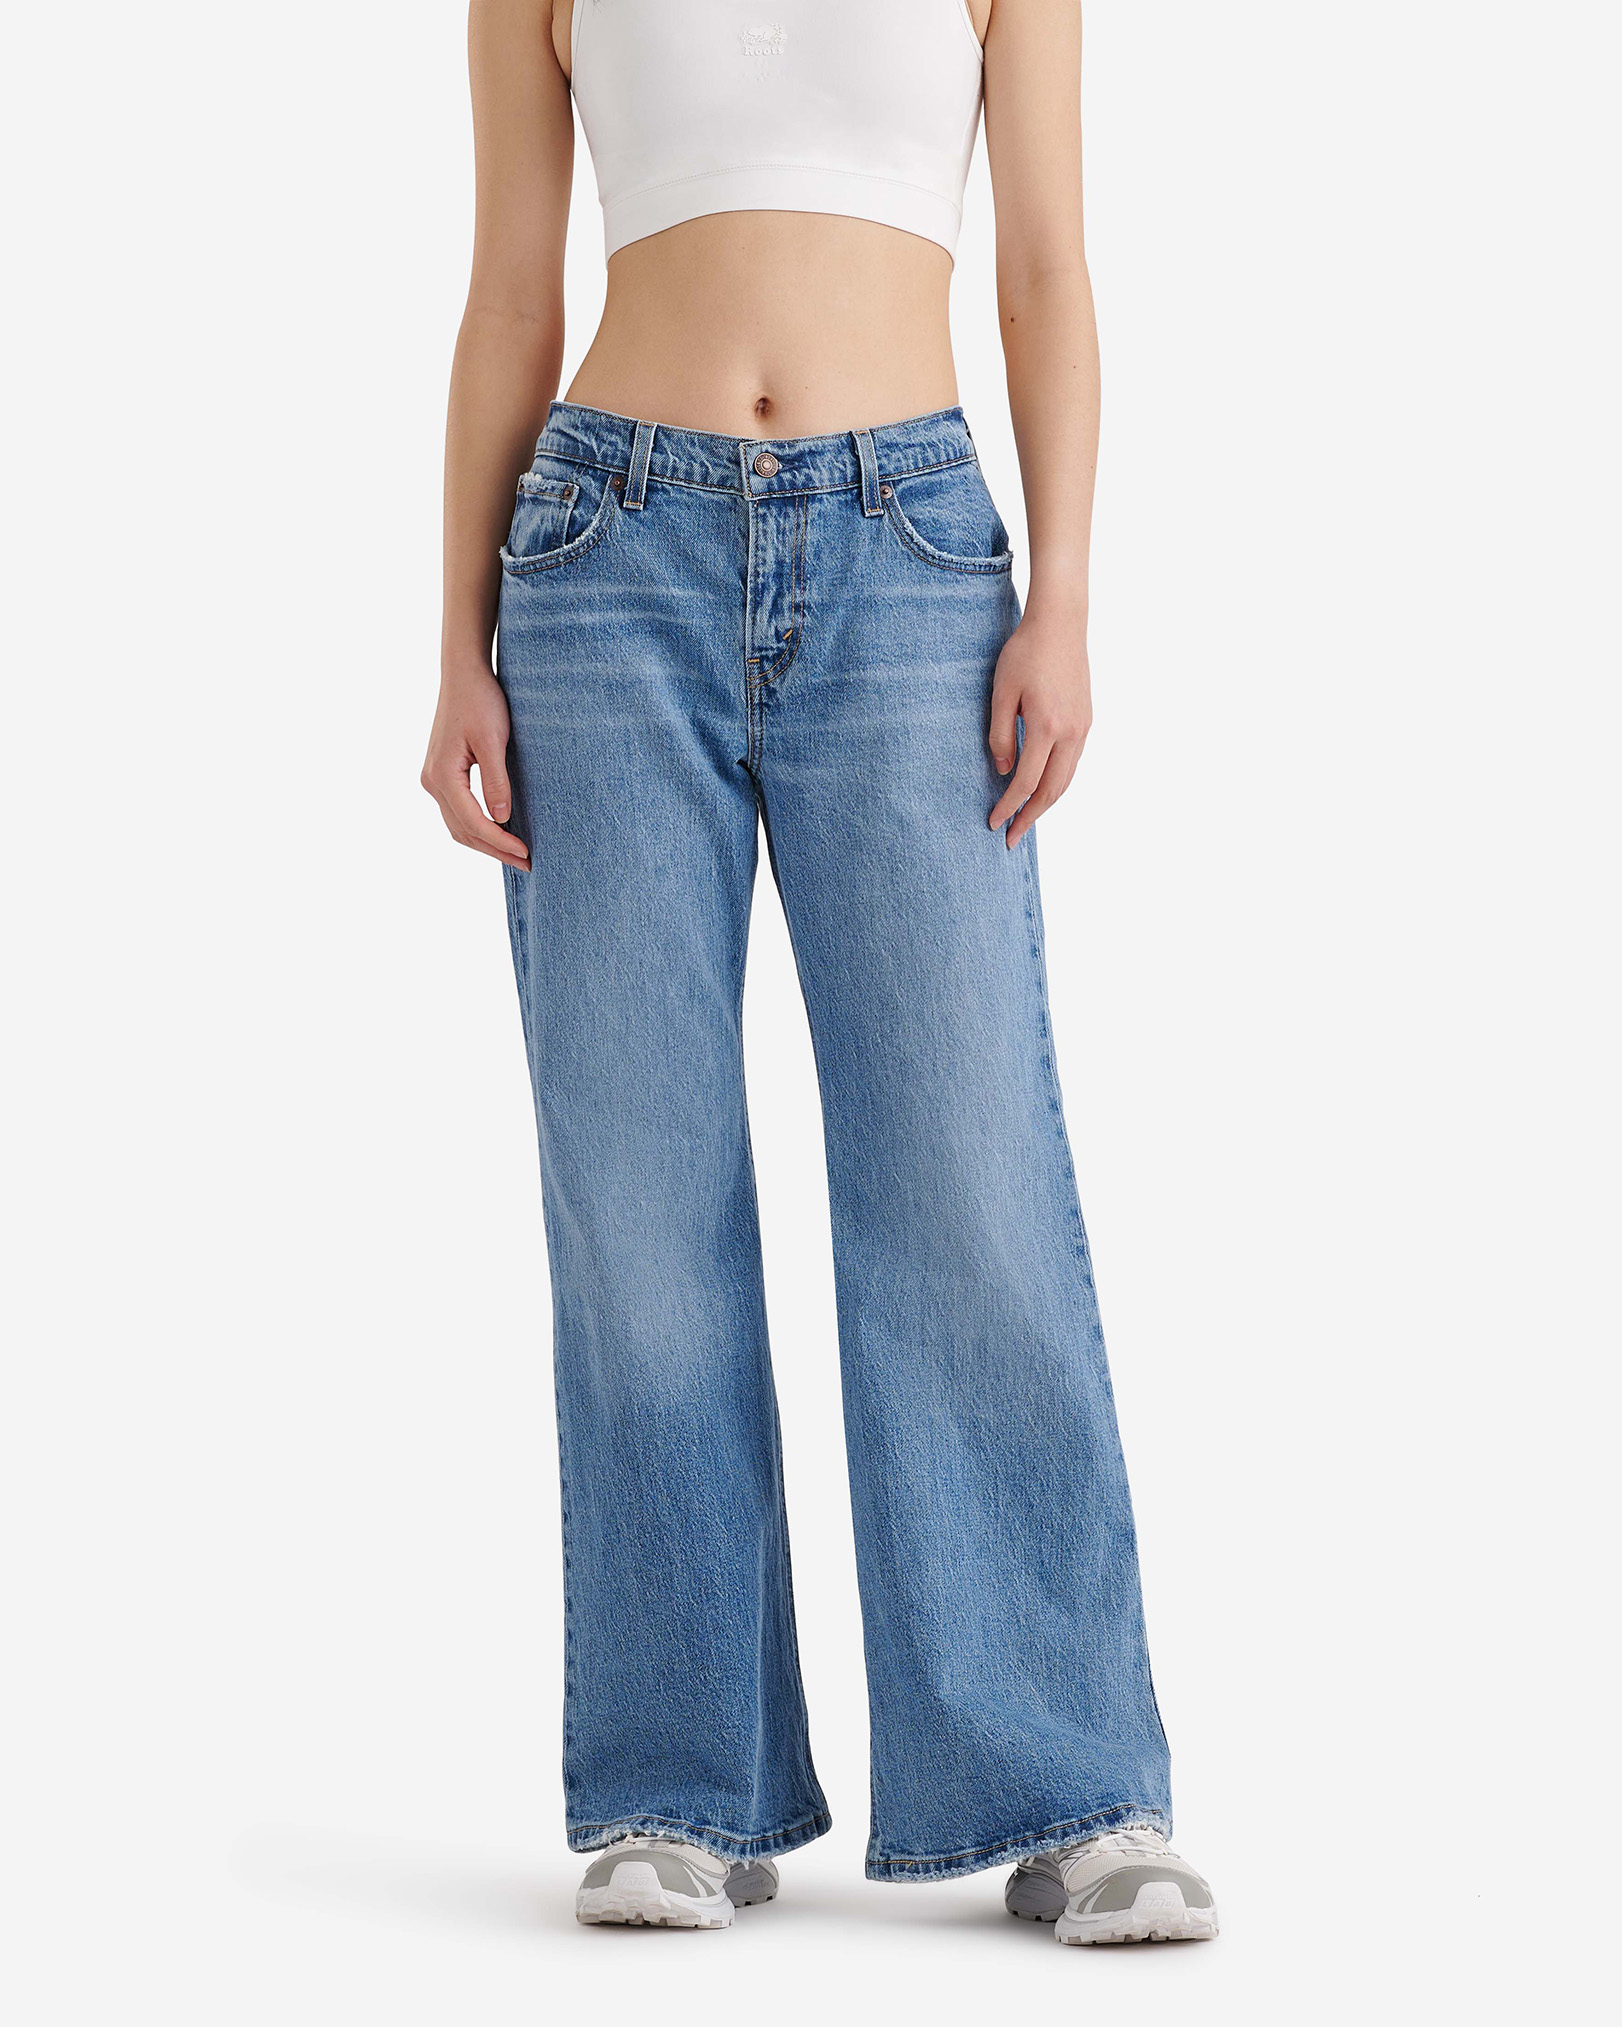 Roots Levi's Middy Flare Women's Jeans Pants in Blue